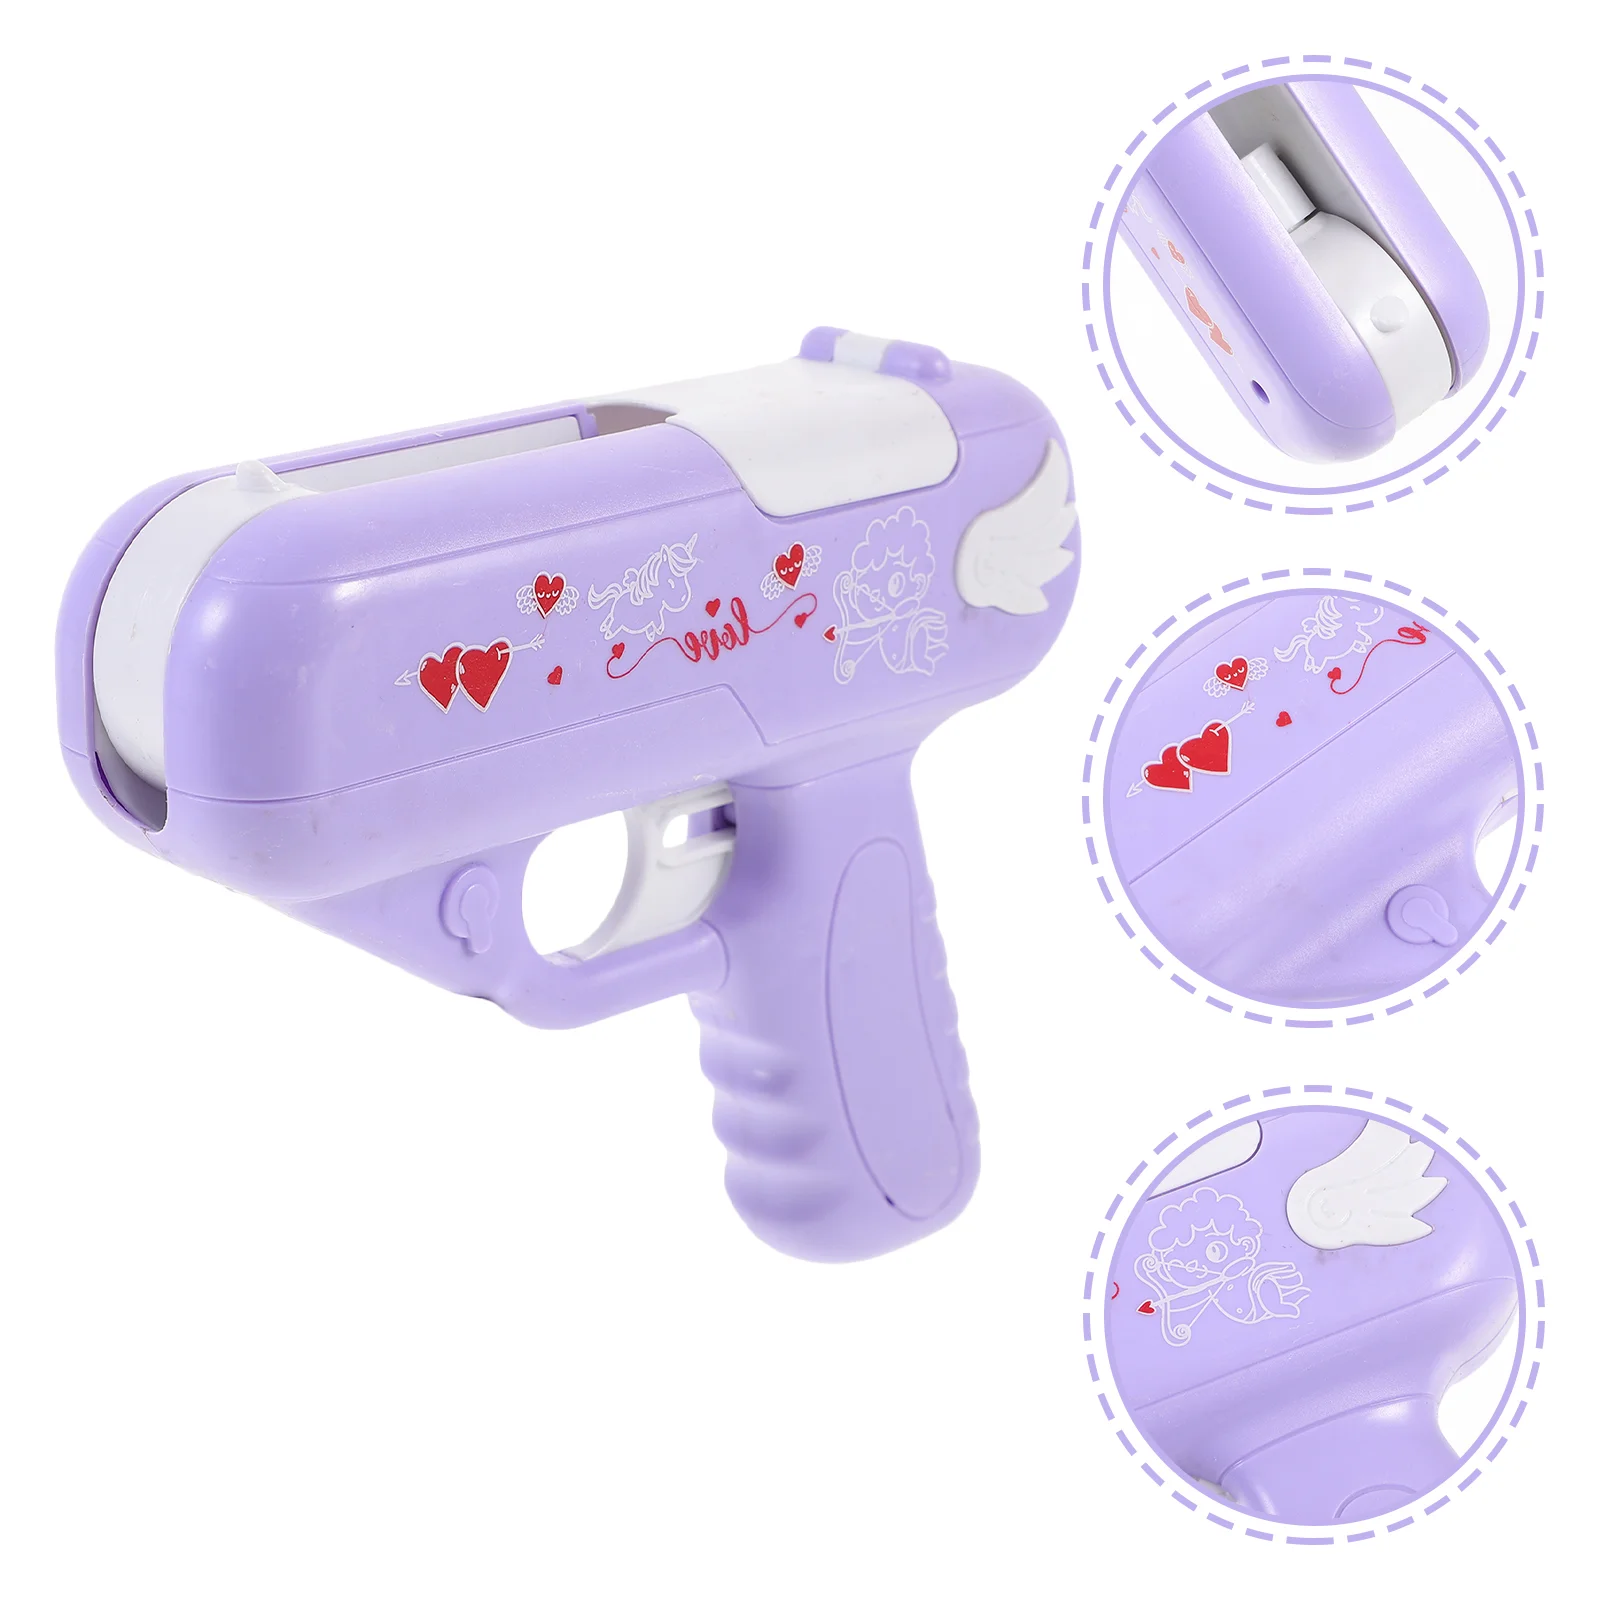 

Lolly Pops Plastic Lollipop Holder Interesting Launch Toy Robot Party Funny Shooter Purple Candy Shooting Cute Child